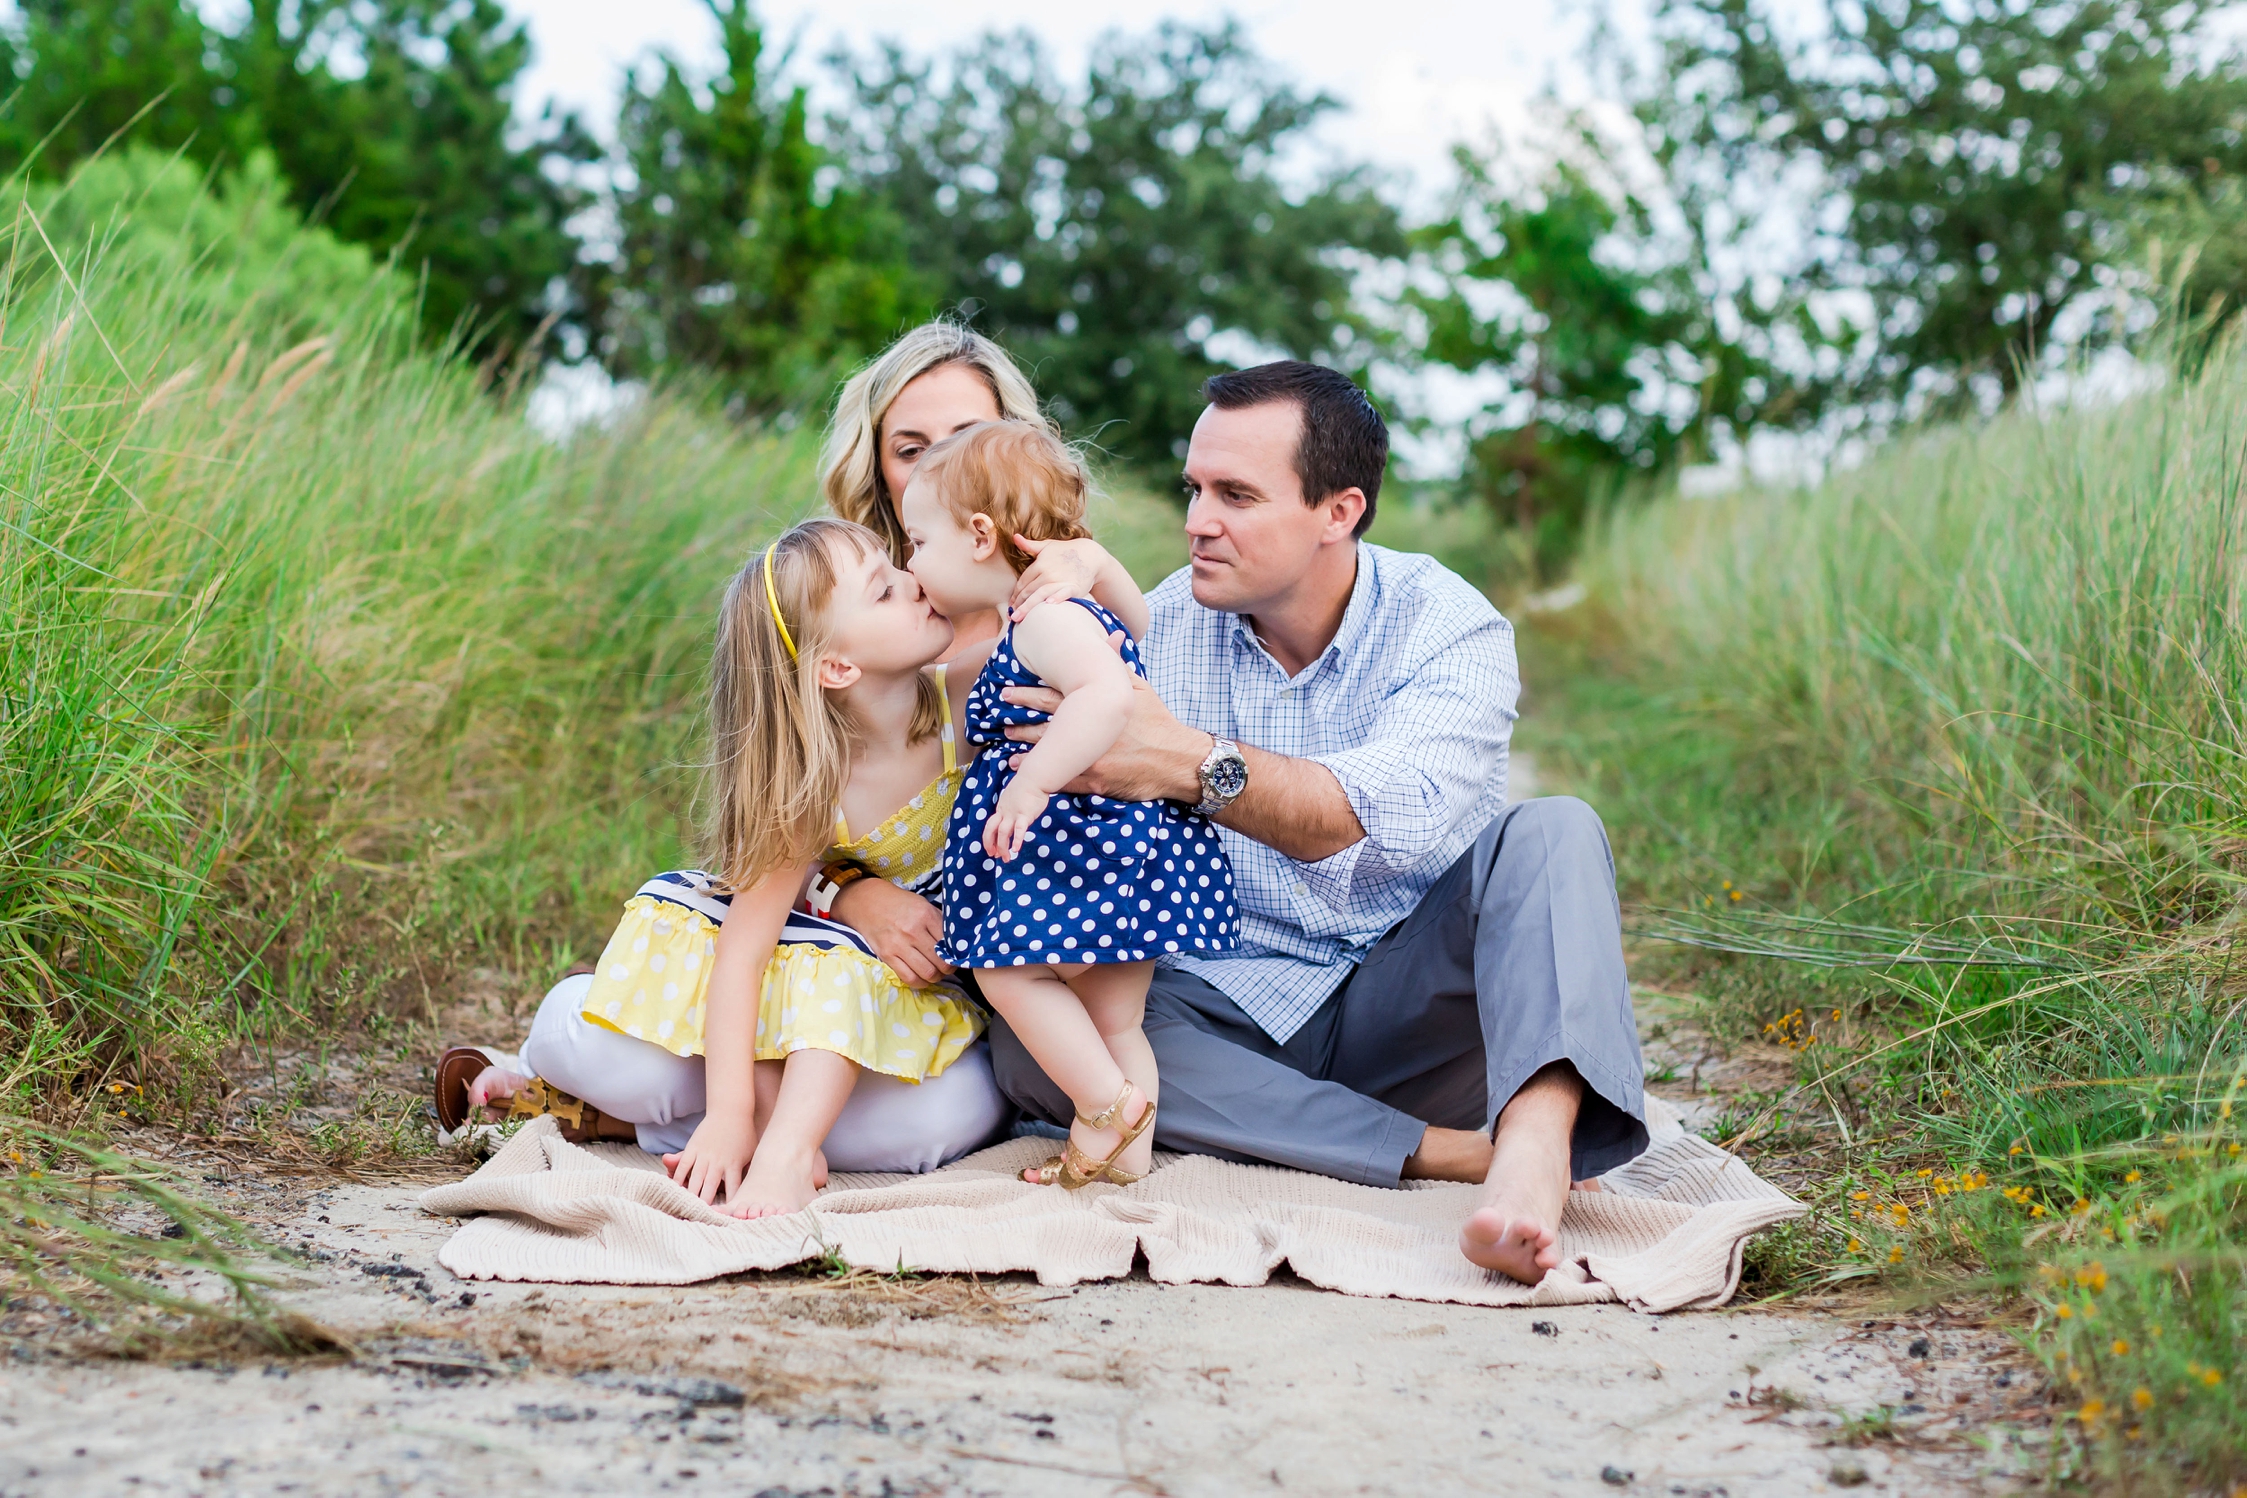 Beautiful Virginia Outdoor Family Lifestyle Session by Brooke Tucker Photography